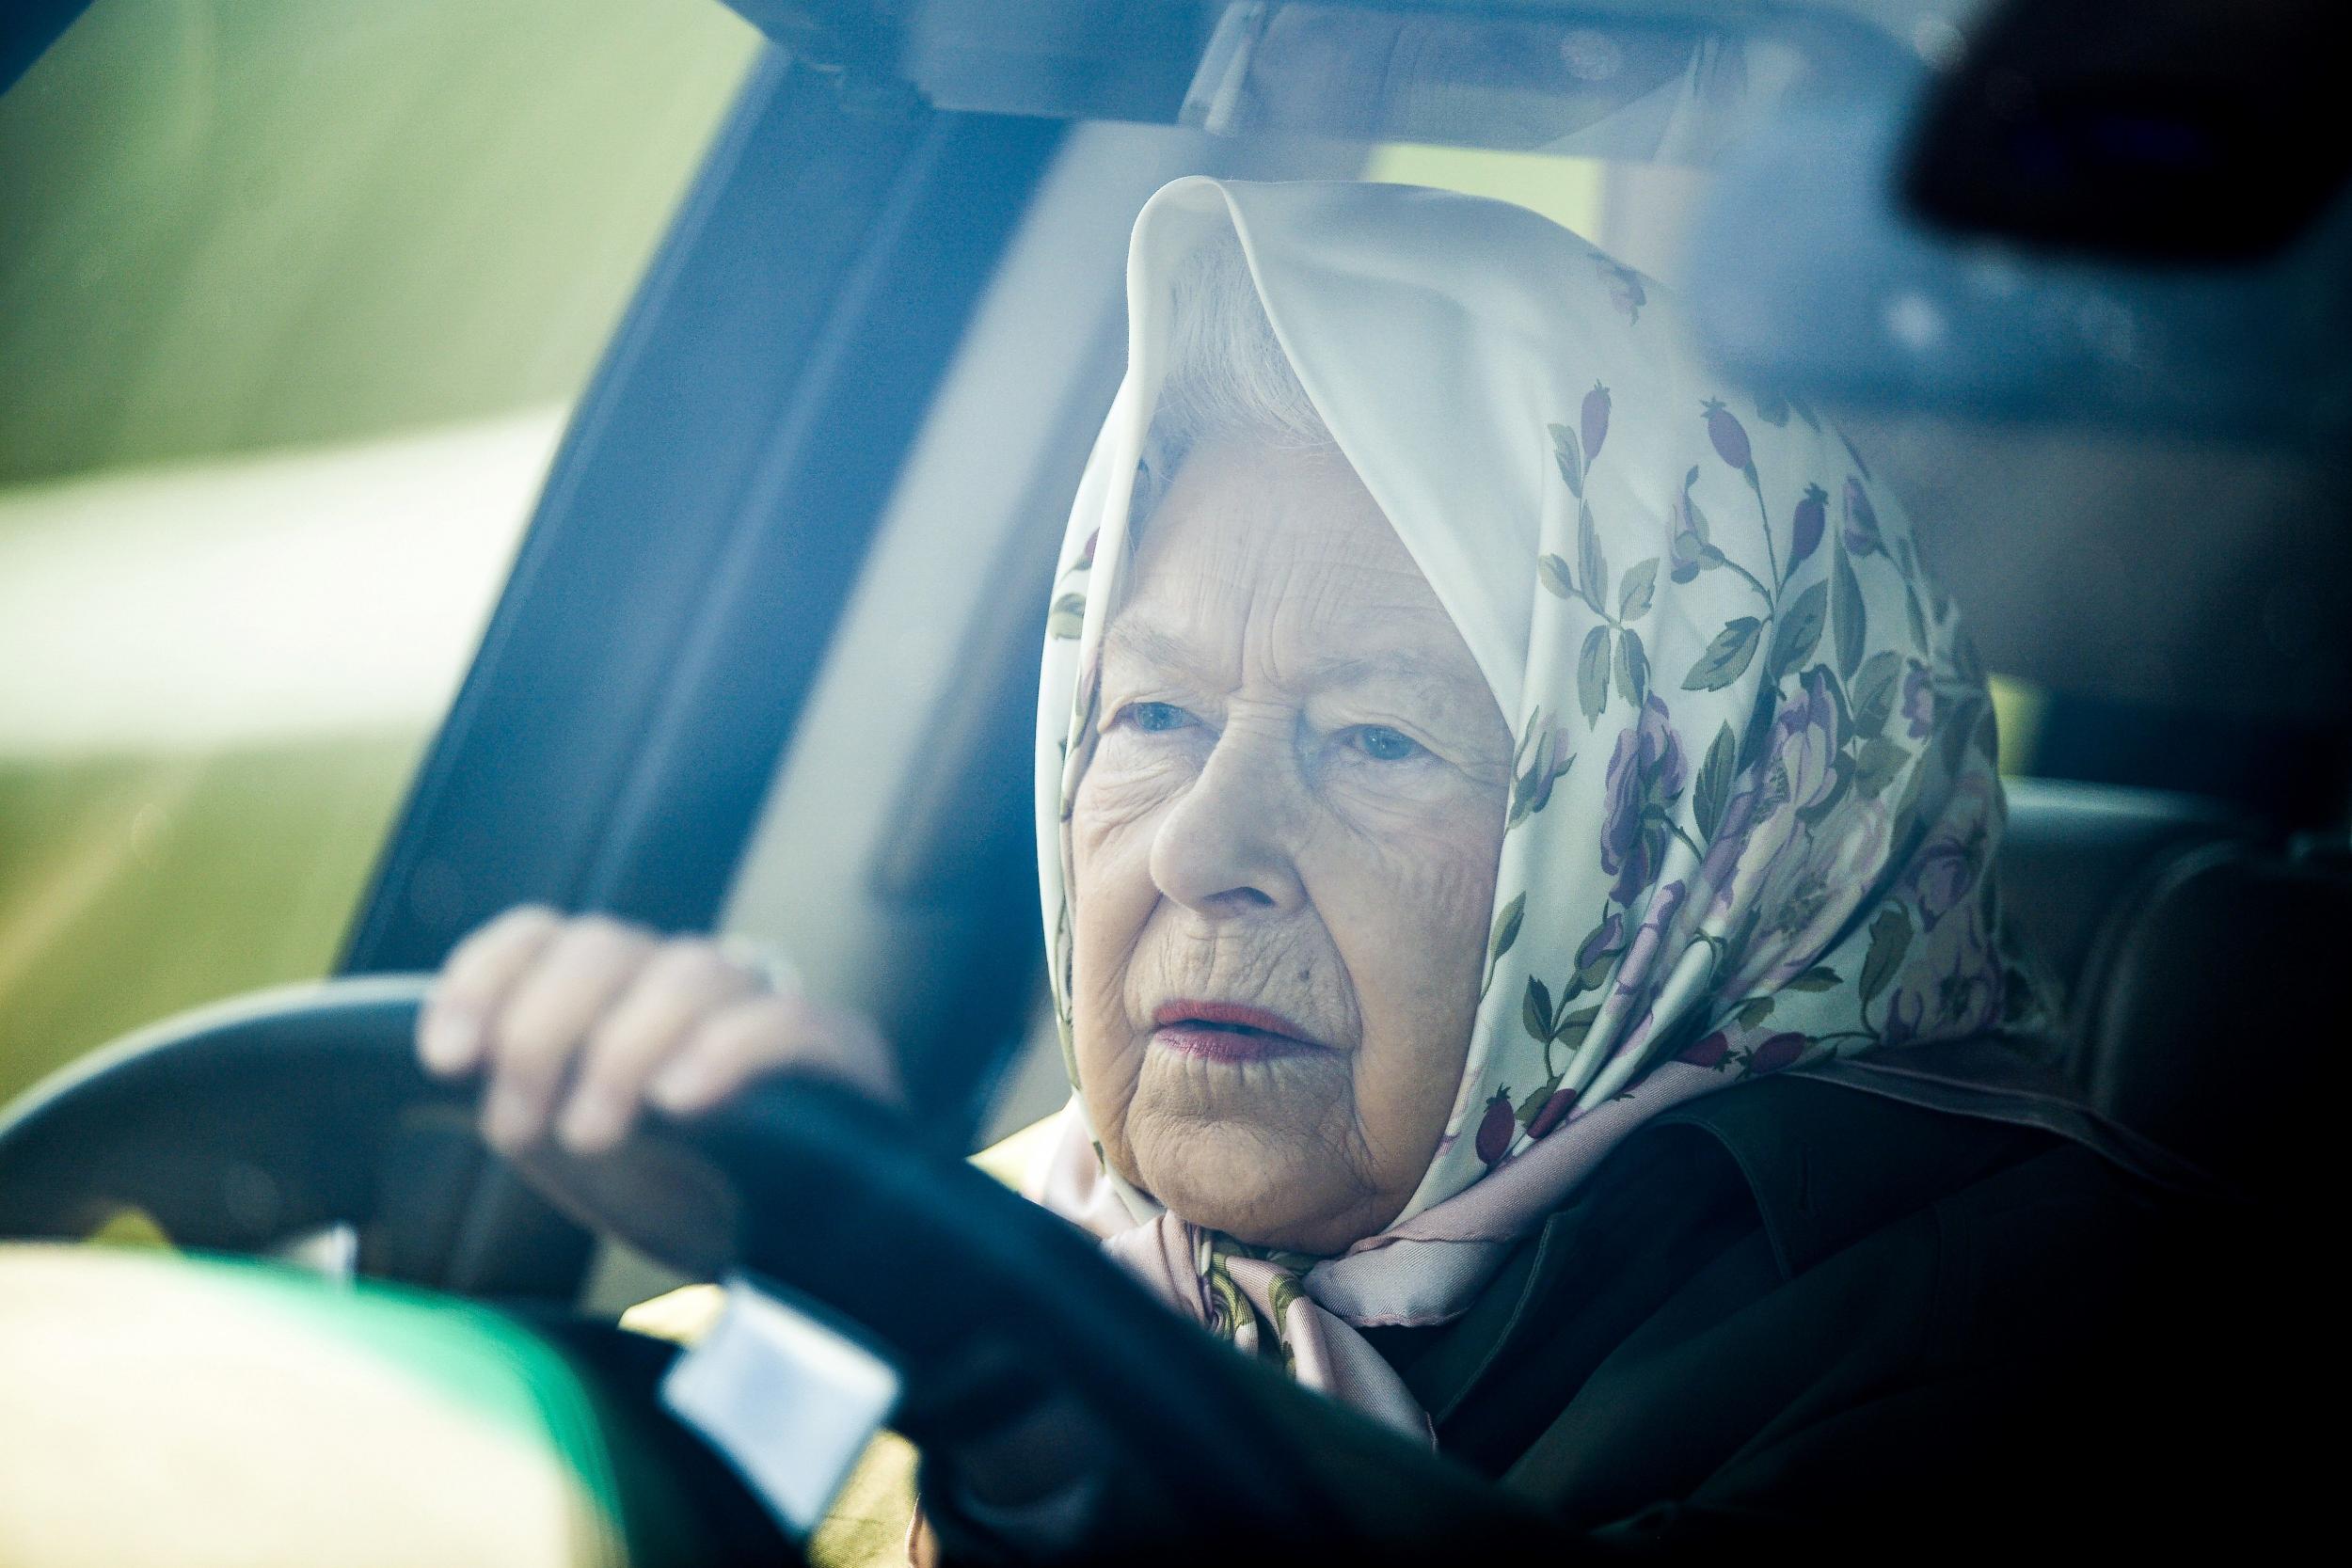 Queen Elizabeth II pictured driving her Range Rover to attend the annual Royal Windsor Horse Show in May 2019